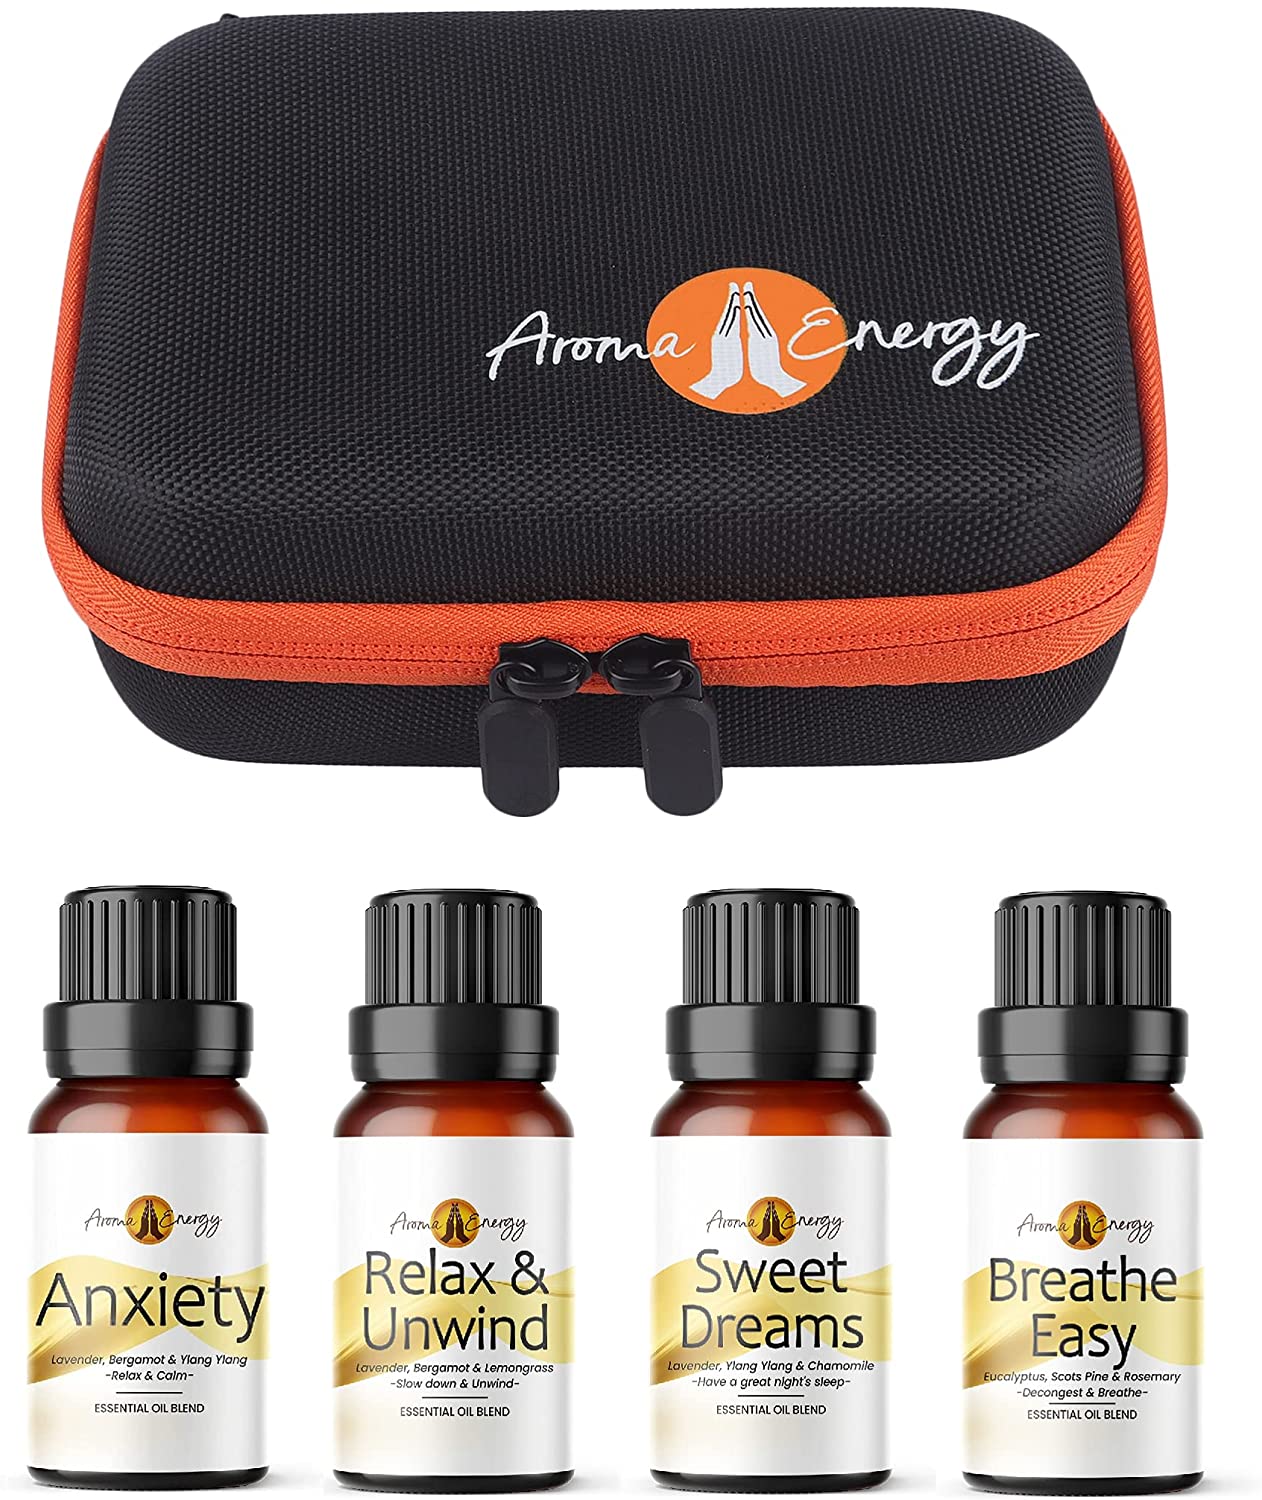 Essential Oil Gift Set Travel Case with pack of 4 x 10ml Life Essential Oil blends - Anxiety, Sweet Dreams, Relax & Unwind, Breathe Easy - Aroma Energy